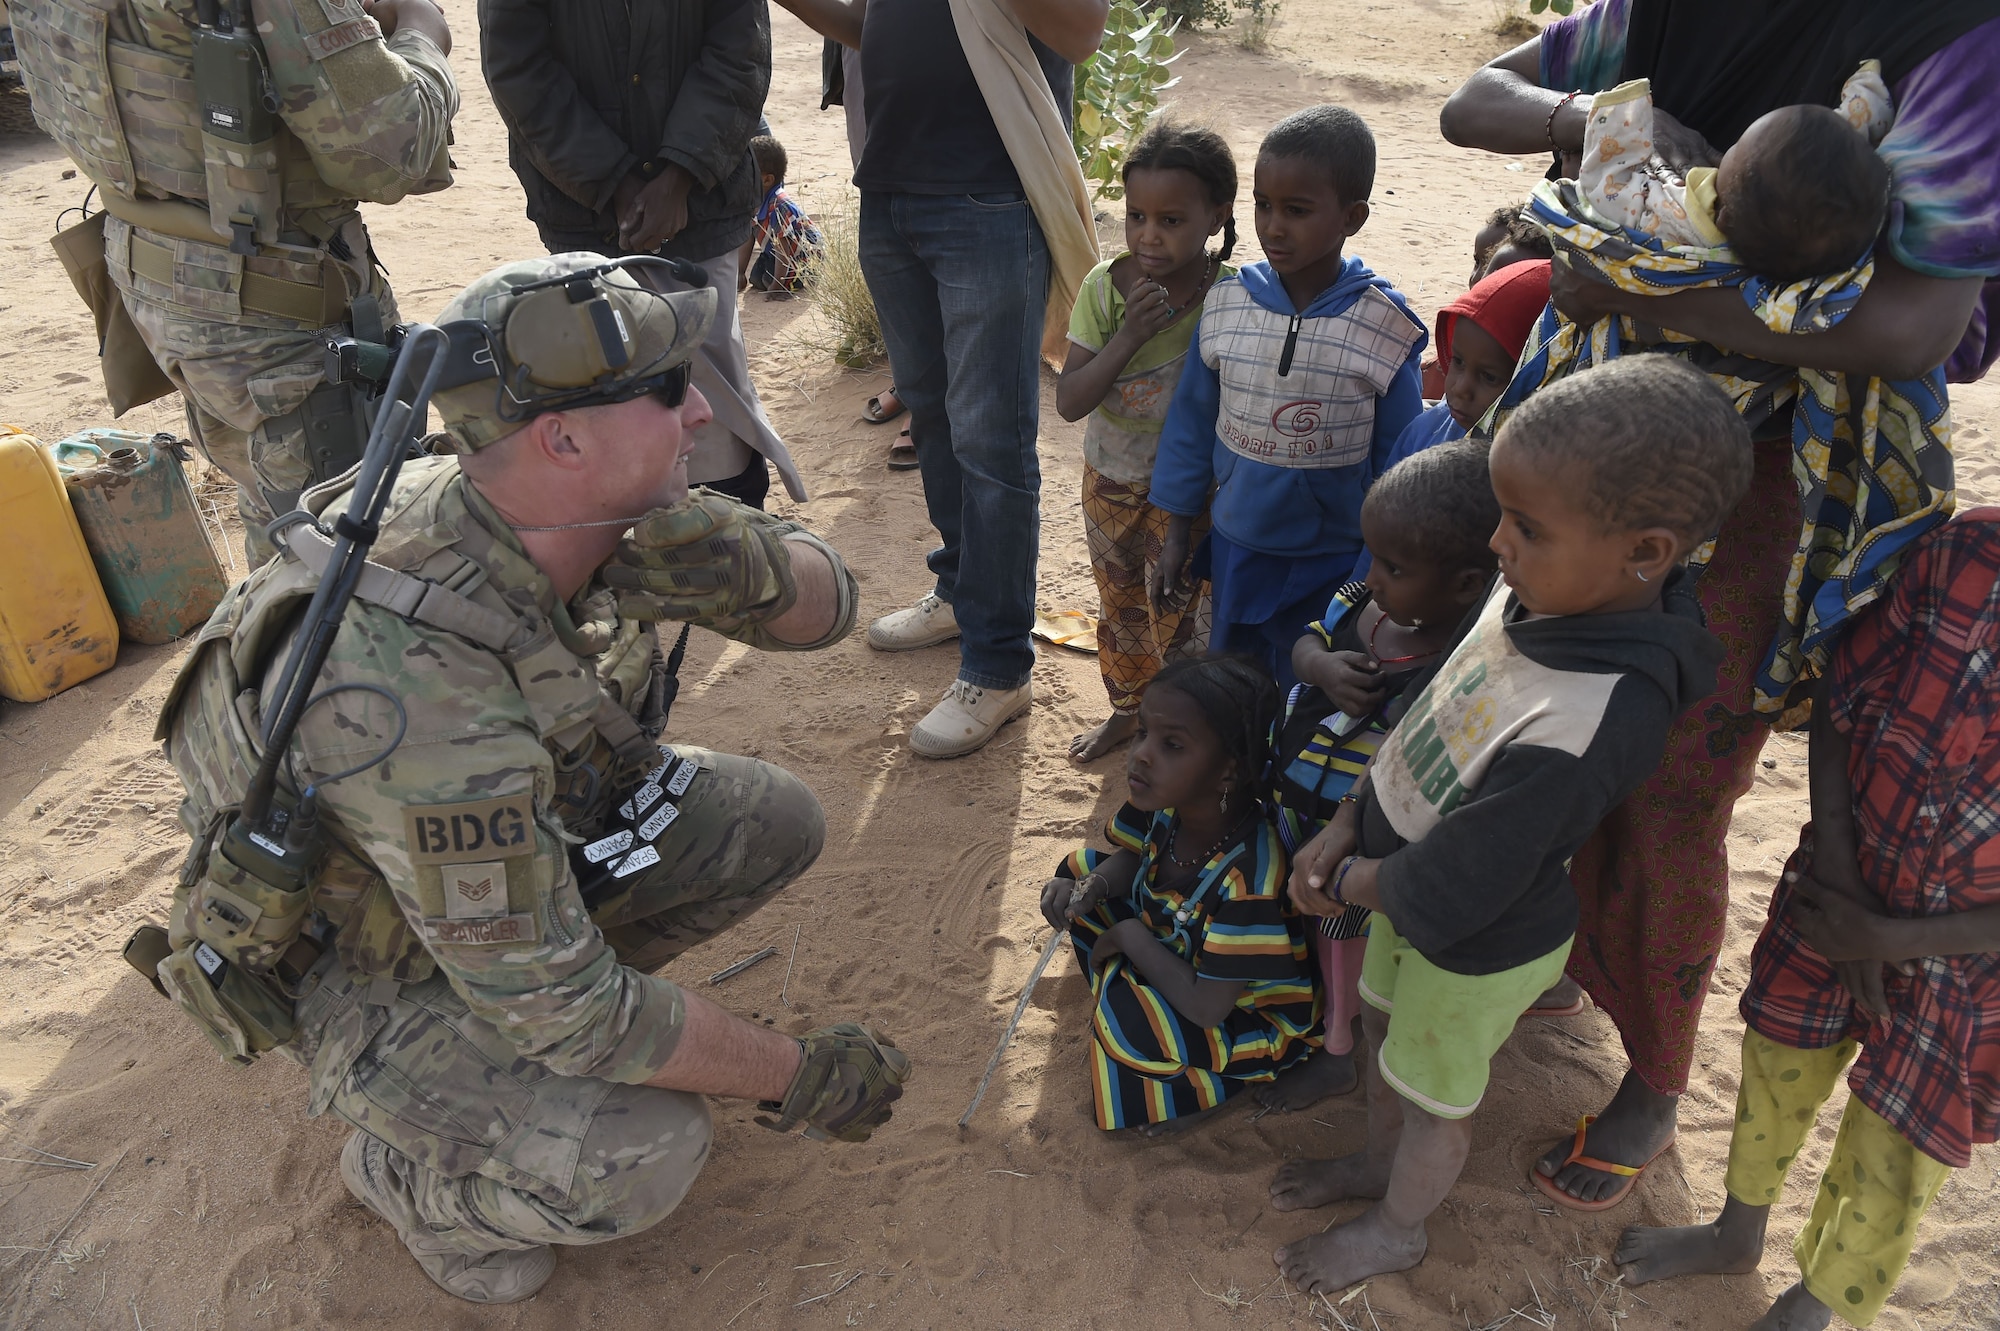 U.S. Air Force Tech Sgt. Douglas N. Spangler, 822nd Expeditionary Base Defense Squadron Security Forces squad leader, speaks to children from a nearby village outside of Air Base 201, Niger, Dec. 11, 2017. Spangler led a 13-member patrol team to find a missing two-year-old girl who was lost for six hours outside of Air Base 201. (U.S. Air Force photo by Staff Sgt. Joshua Dewberry)